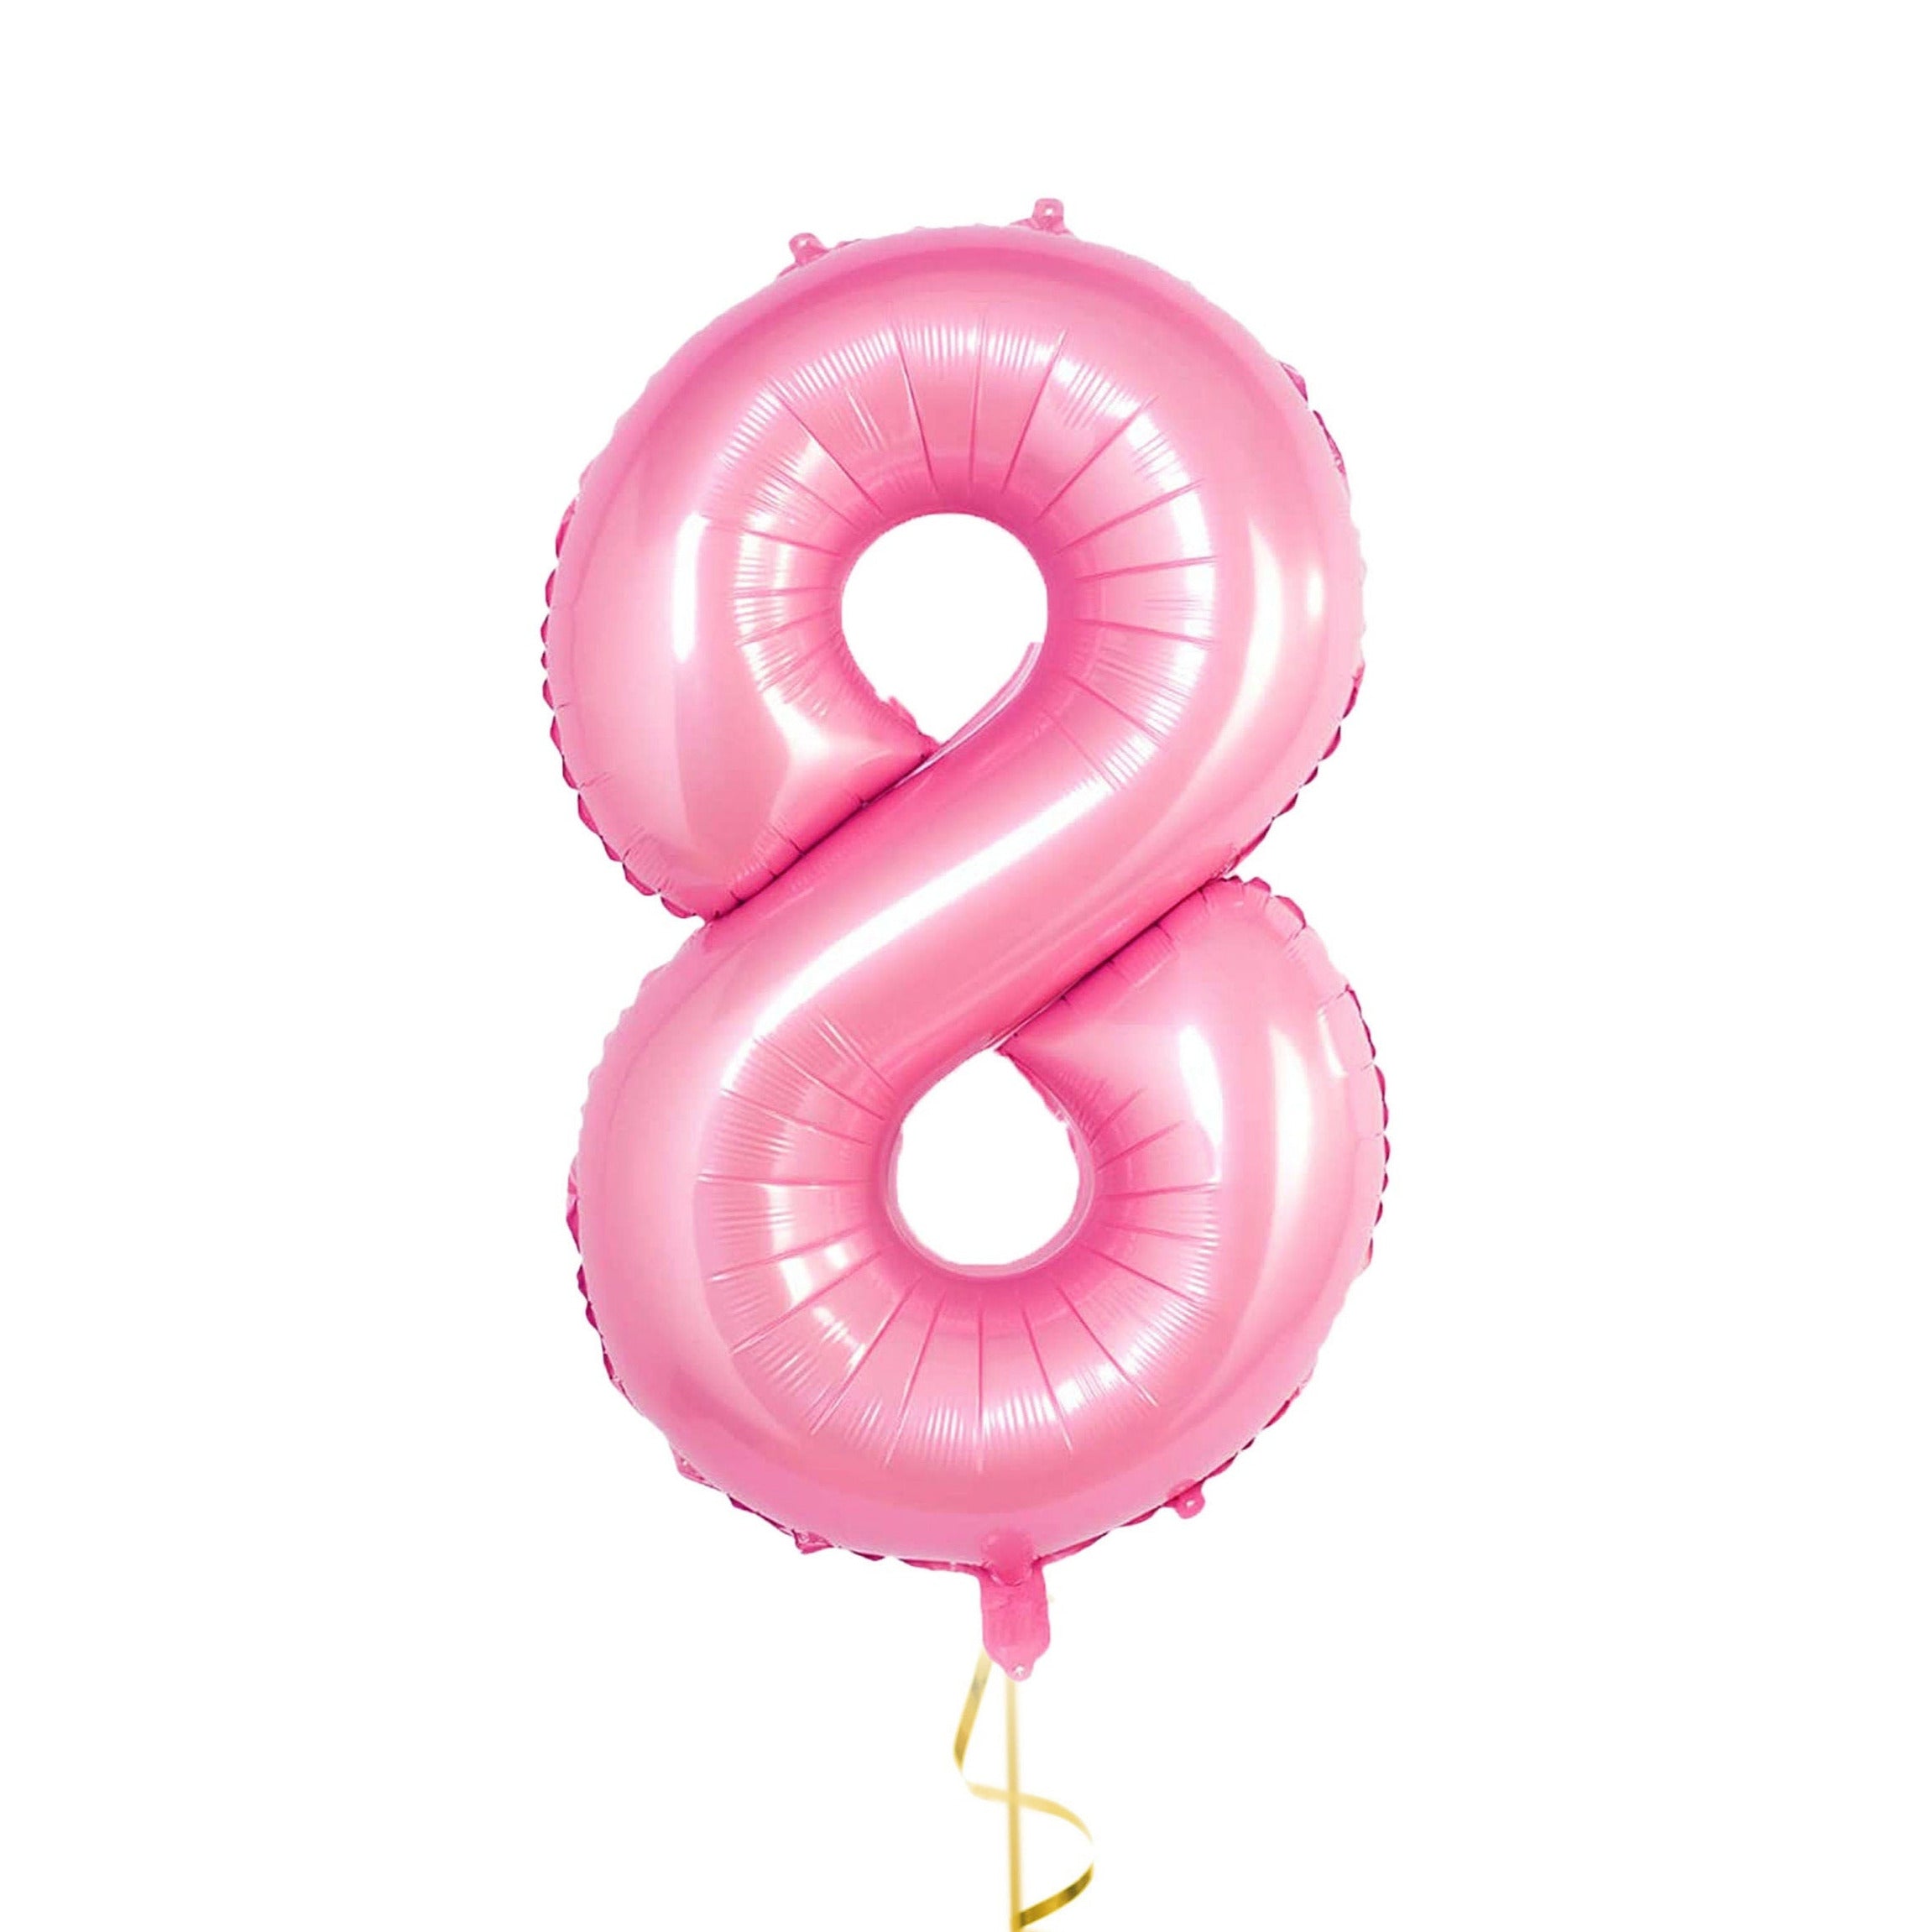 32 Inch Foil Pink Number Eight Shaped Balloon - Celebrate Eight in Style!